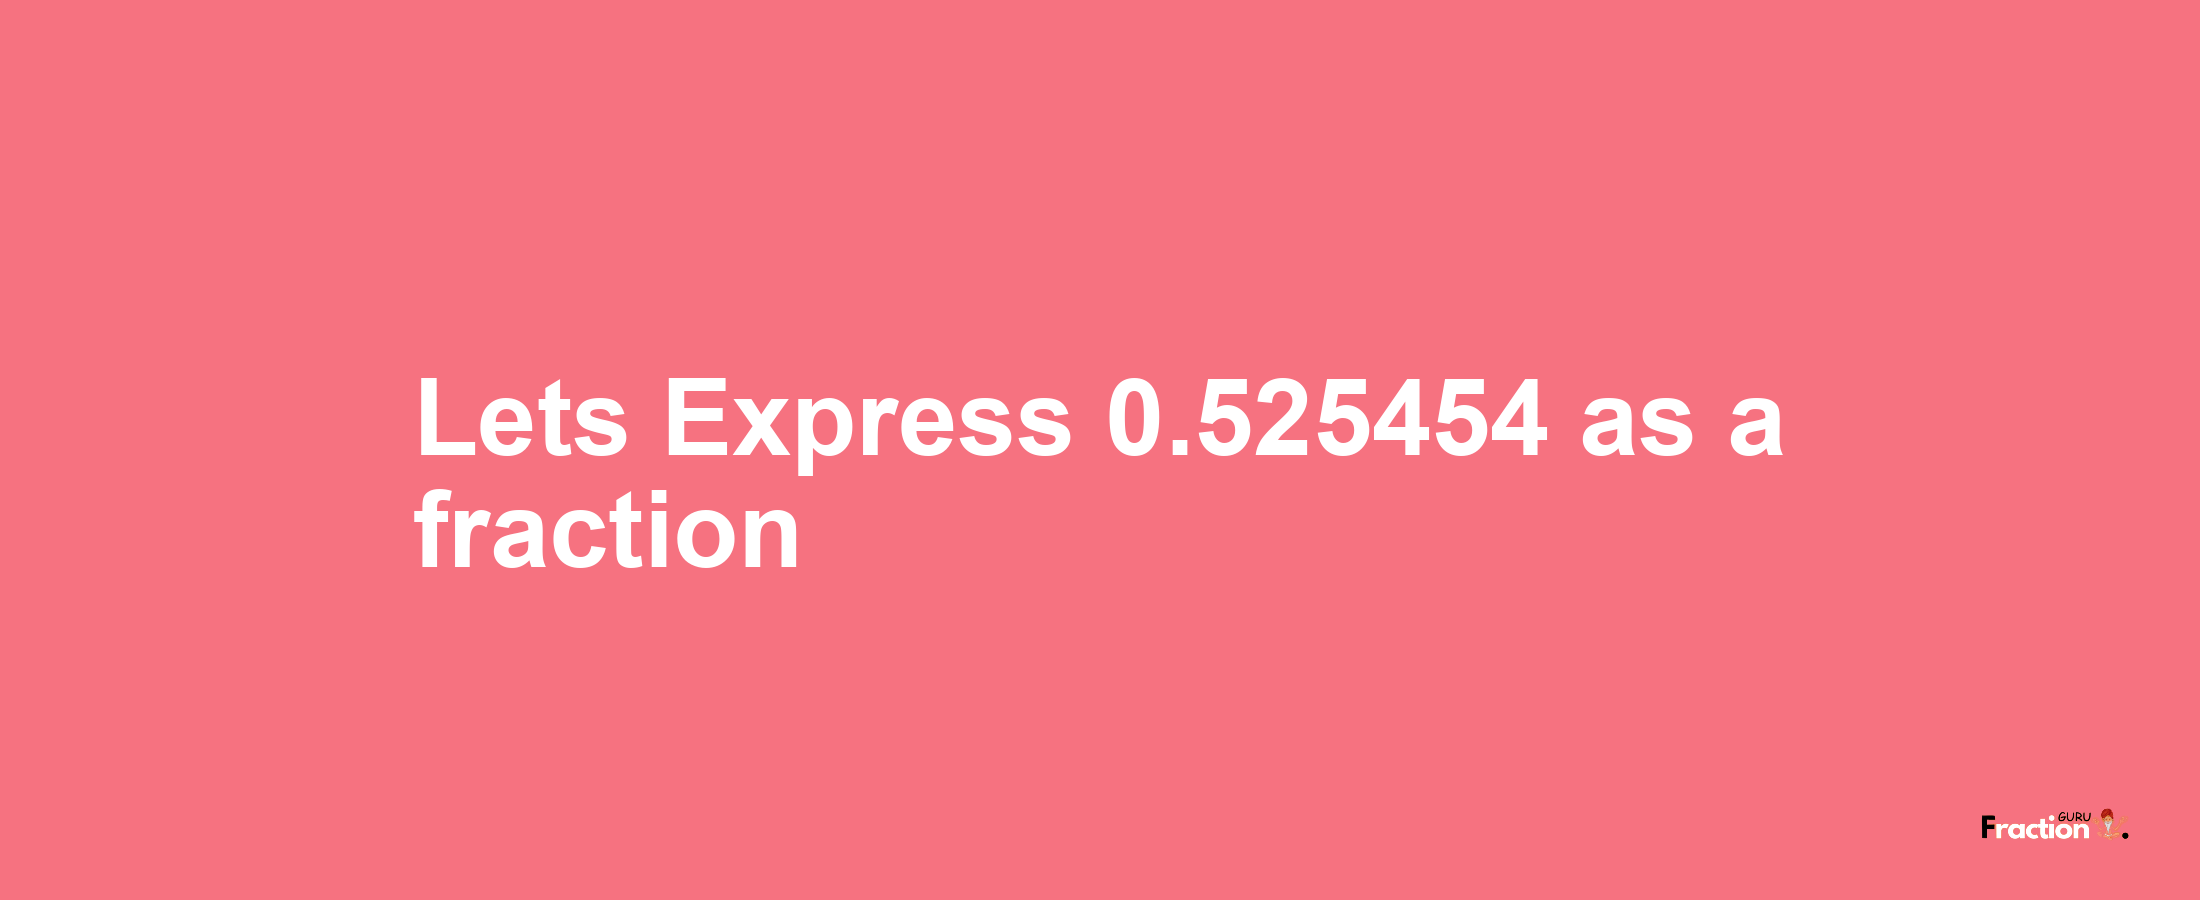 Lets Express 0.525454 as afraction